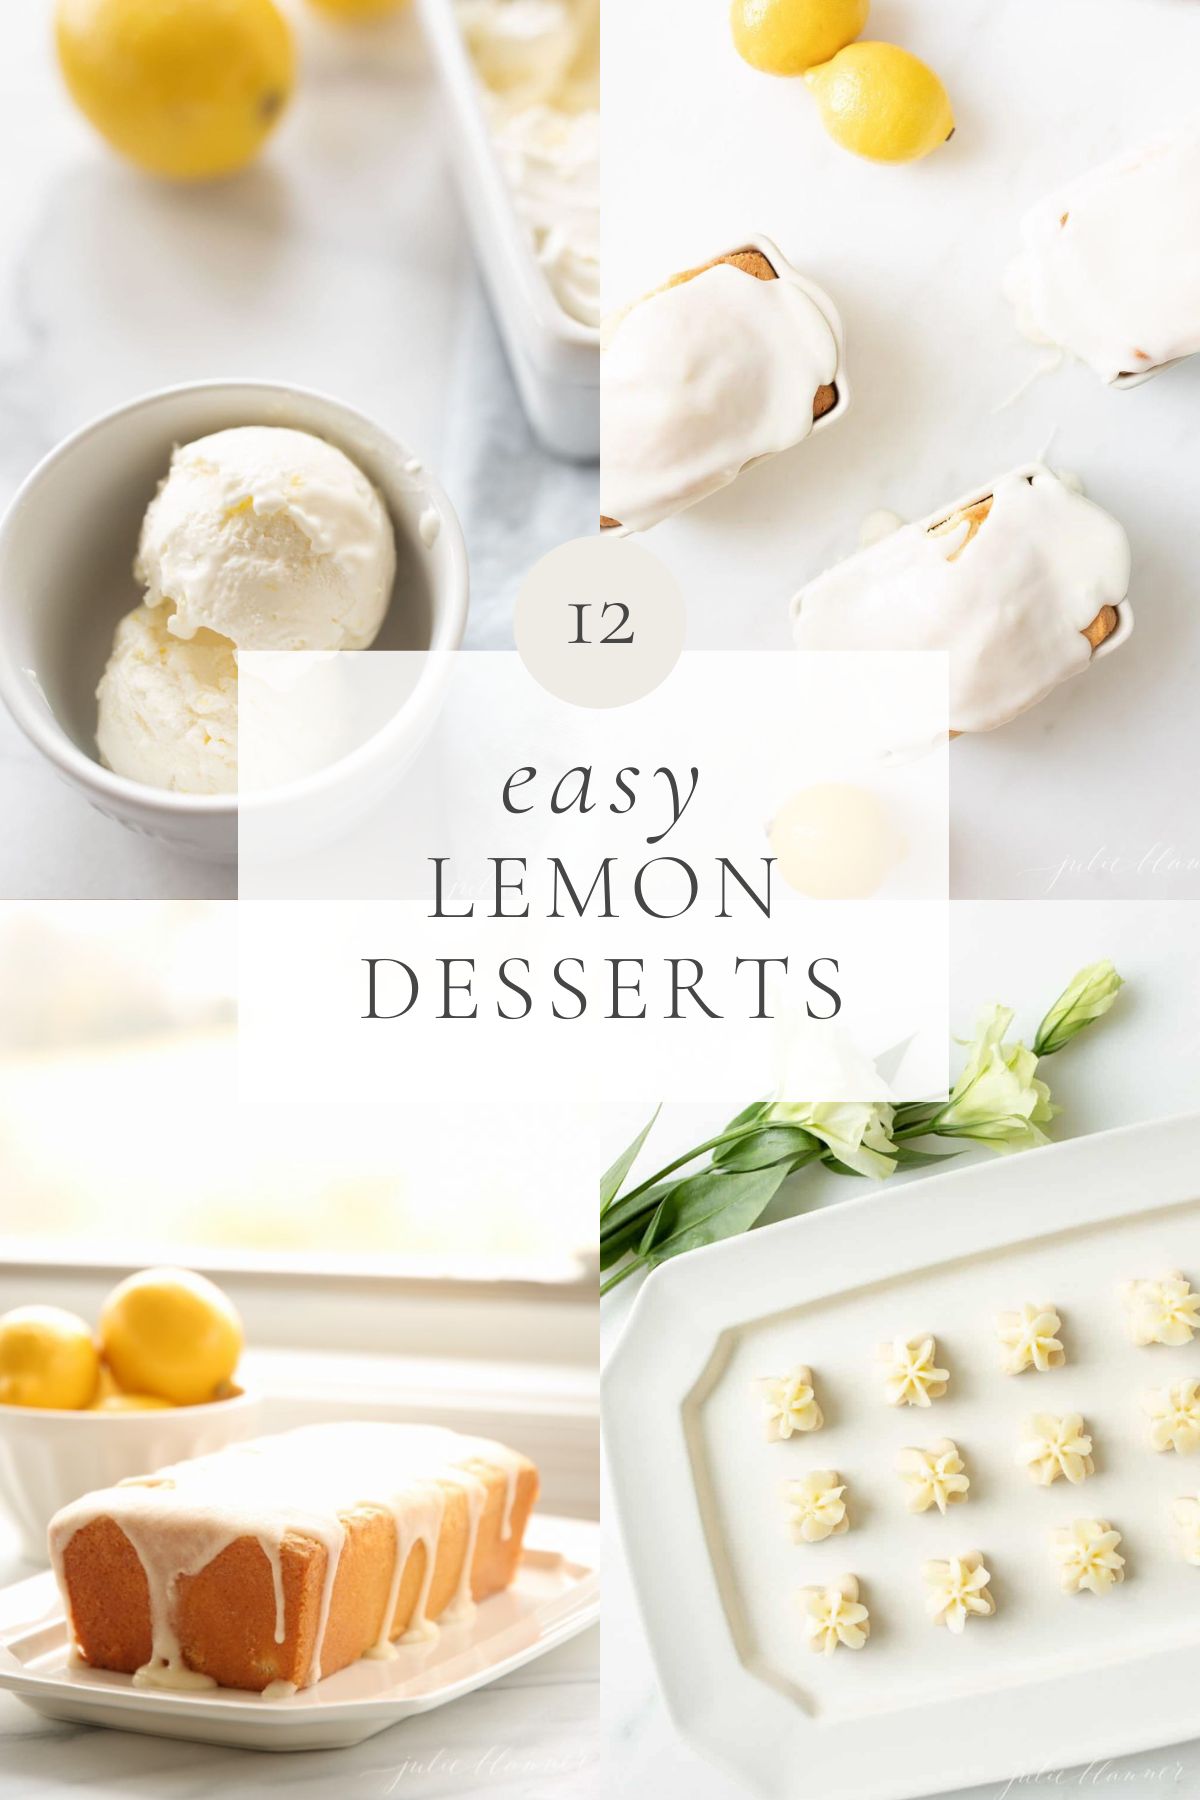 A graphic featuring a variety of lemon desserts, headline reads "12 easy lemon desserts"